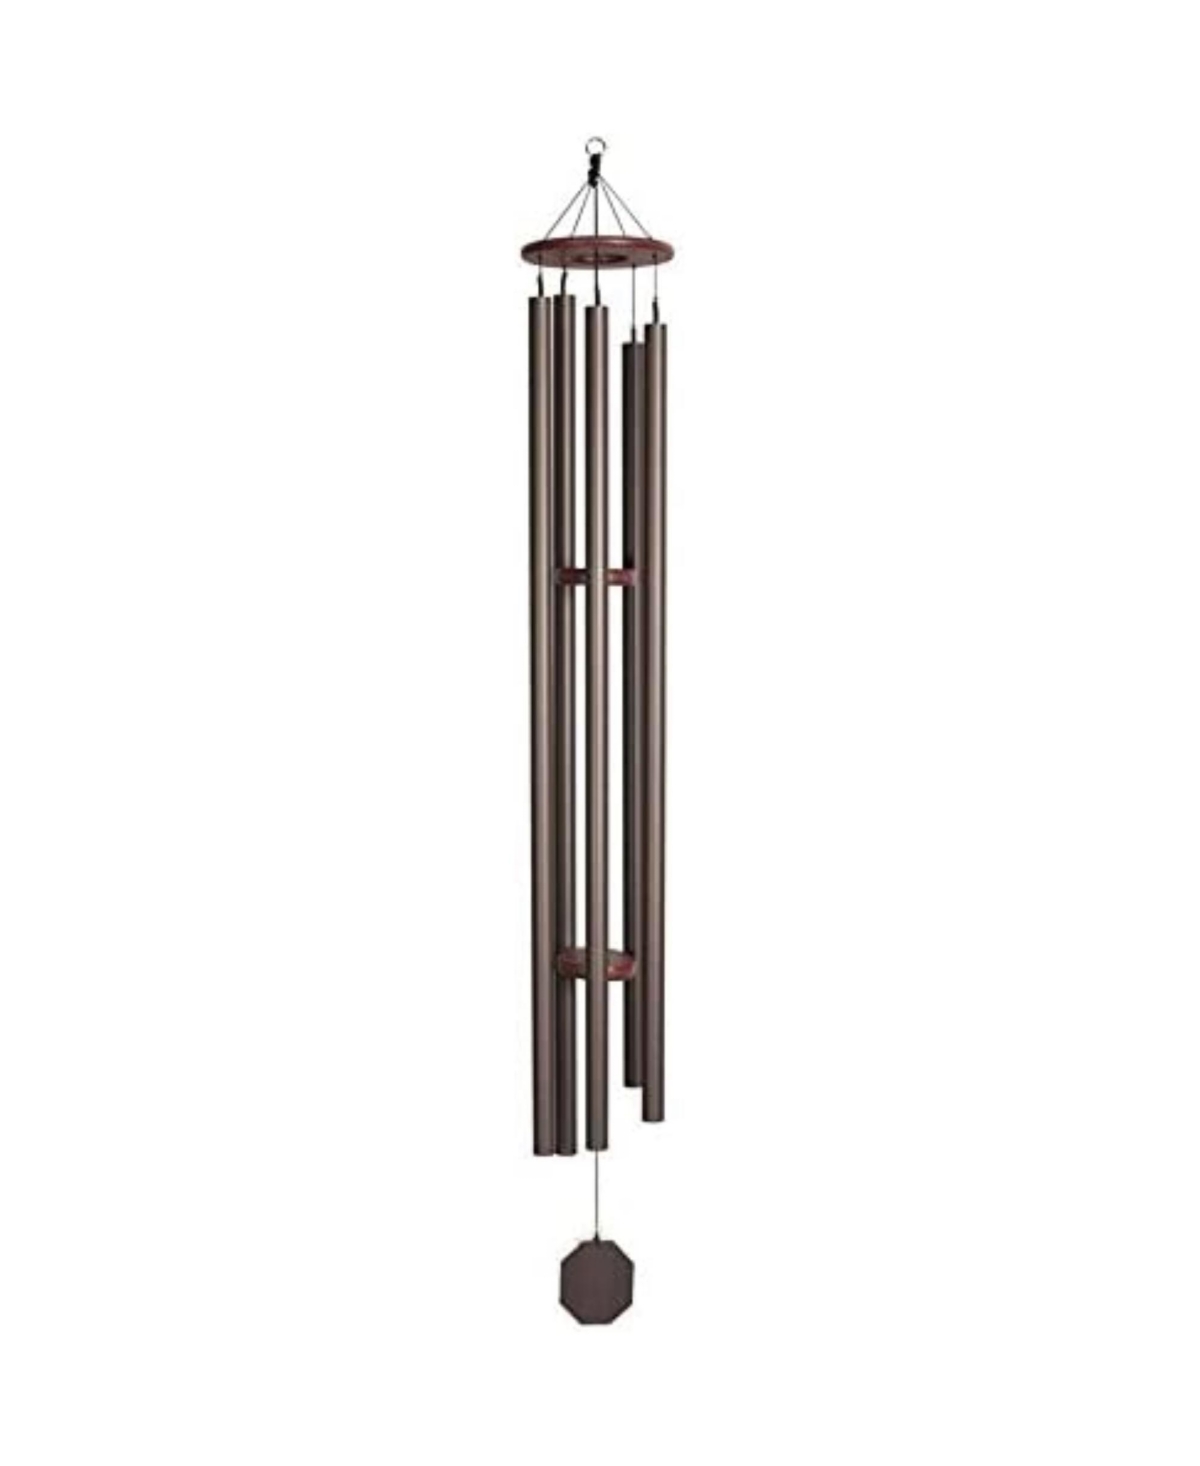 Amish Crafted Wind Chime, Terra - Big Ben - Multi